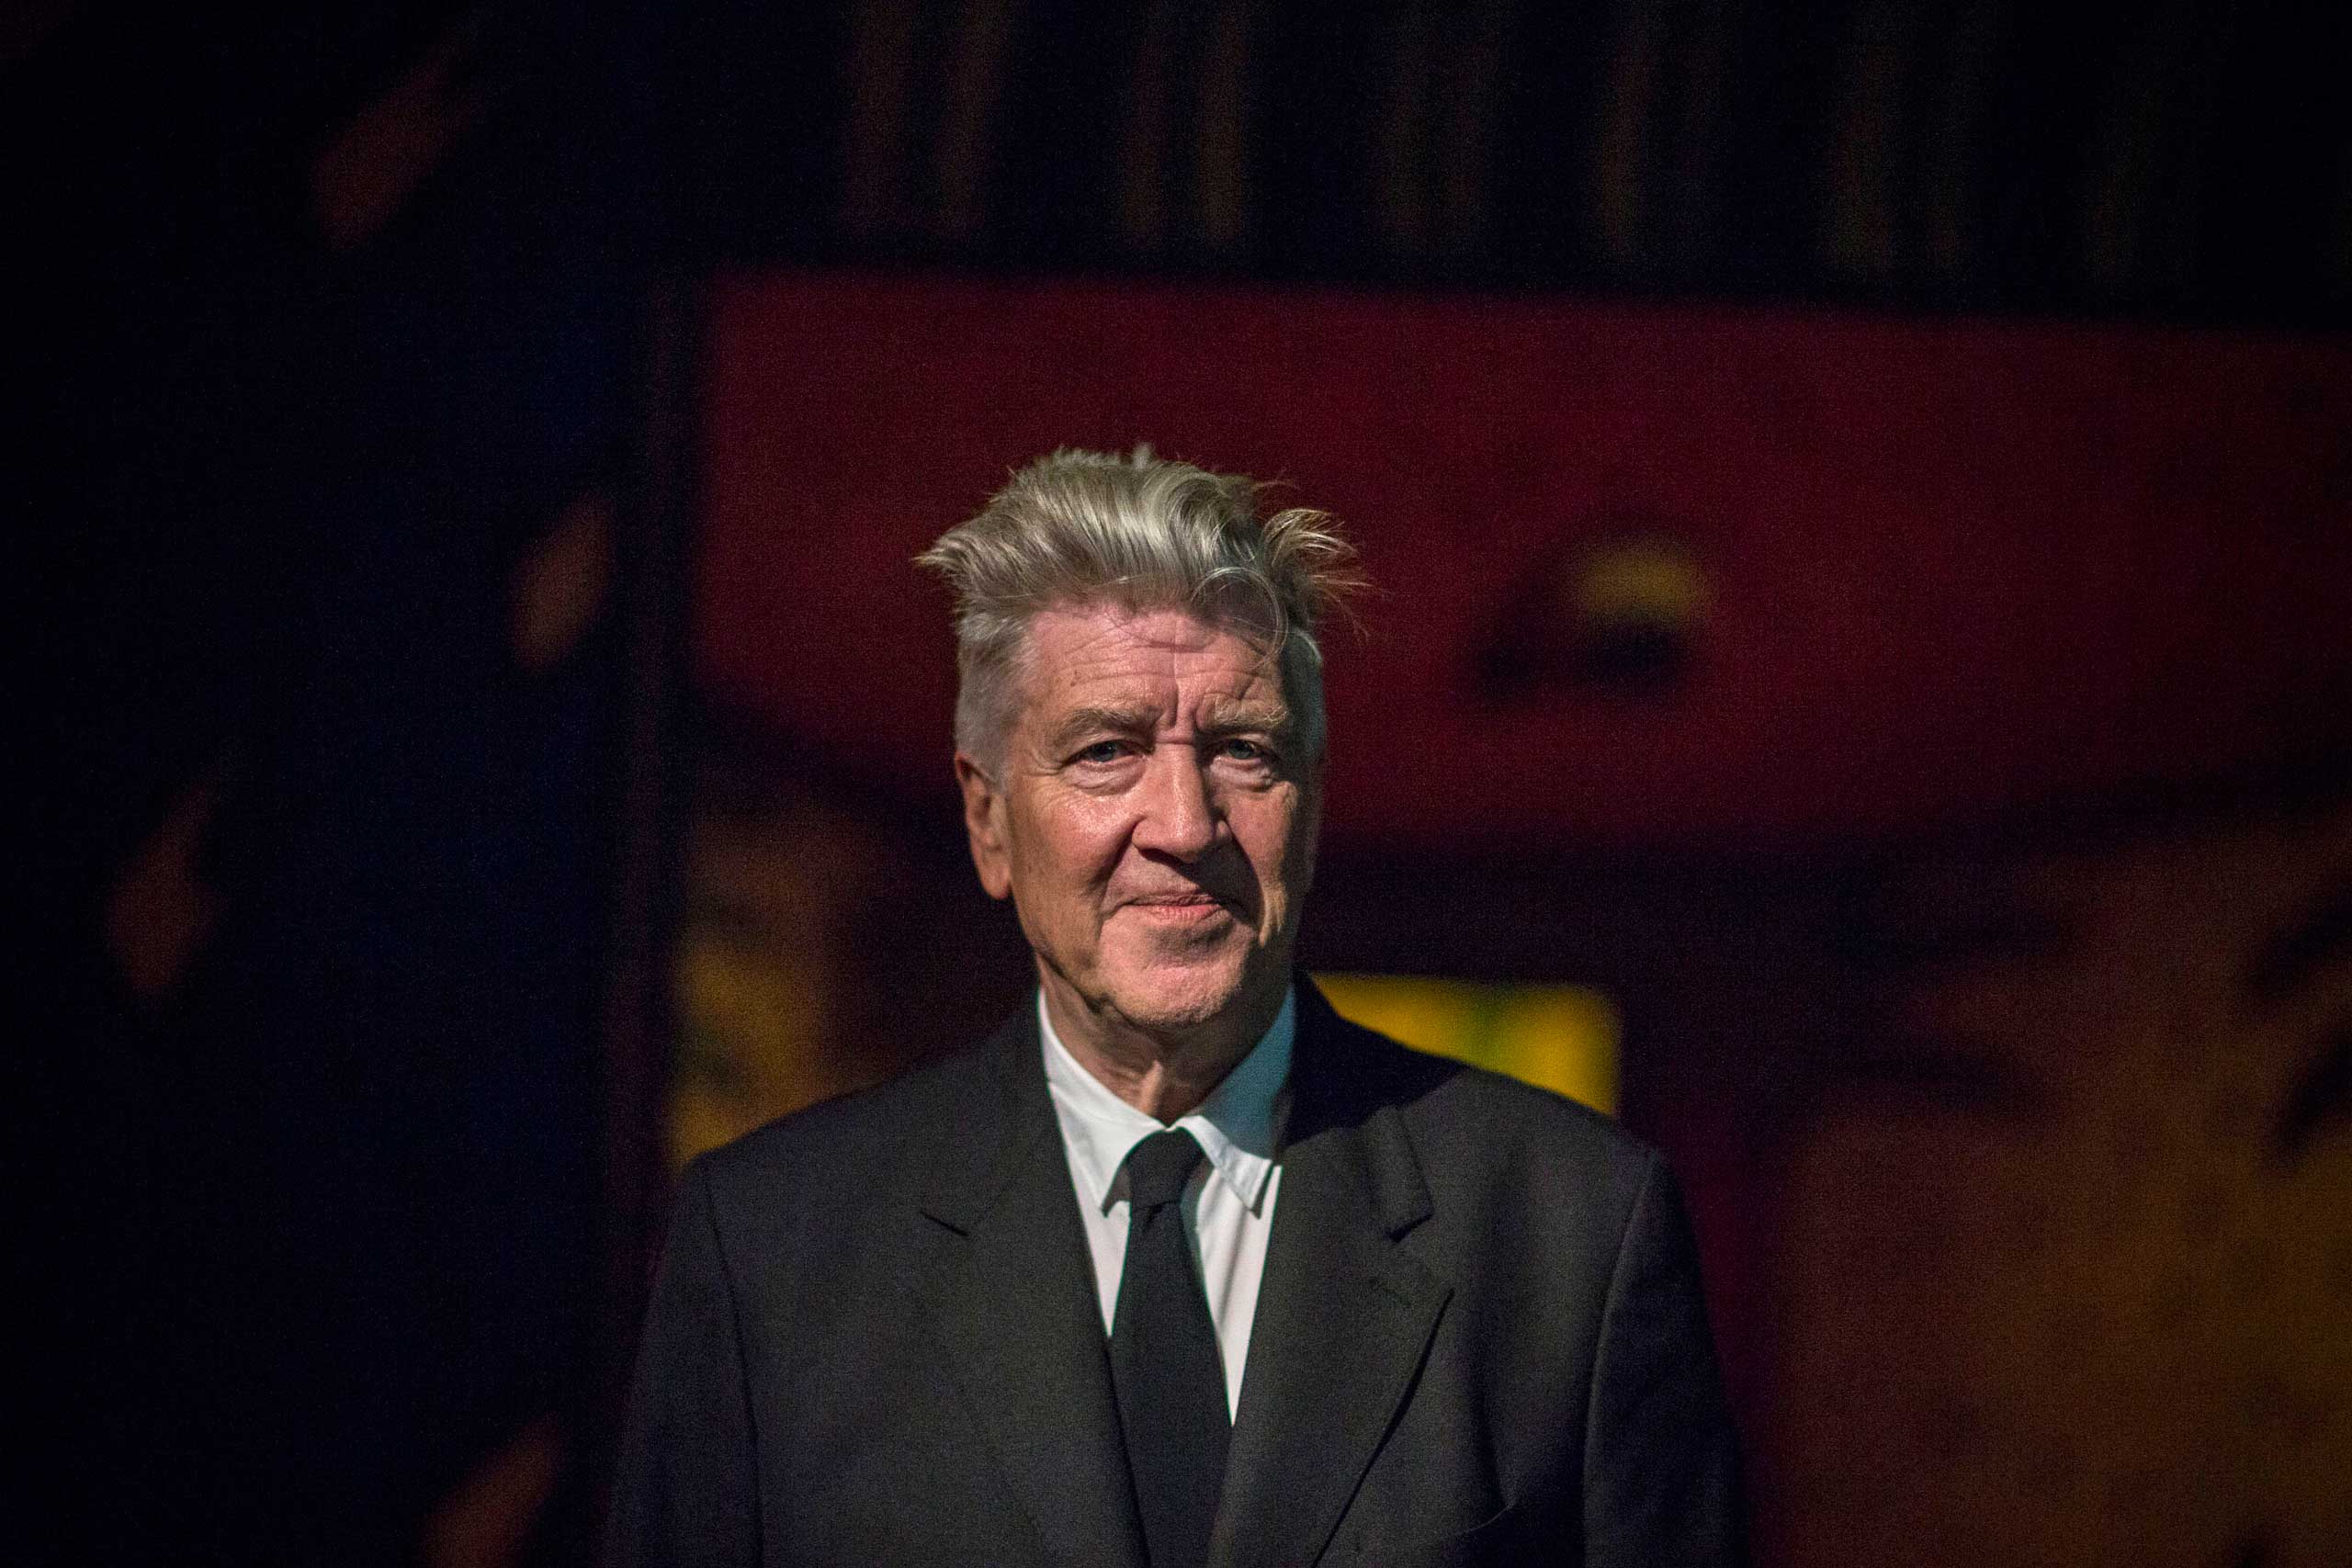 David Lynch at the opening of his exhibition: Between Two Worlds at Gallery of Modern Art (GOMA) in Brisbane, Australia, on Mar. 13, 2015.